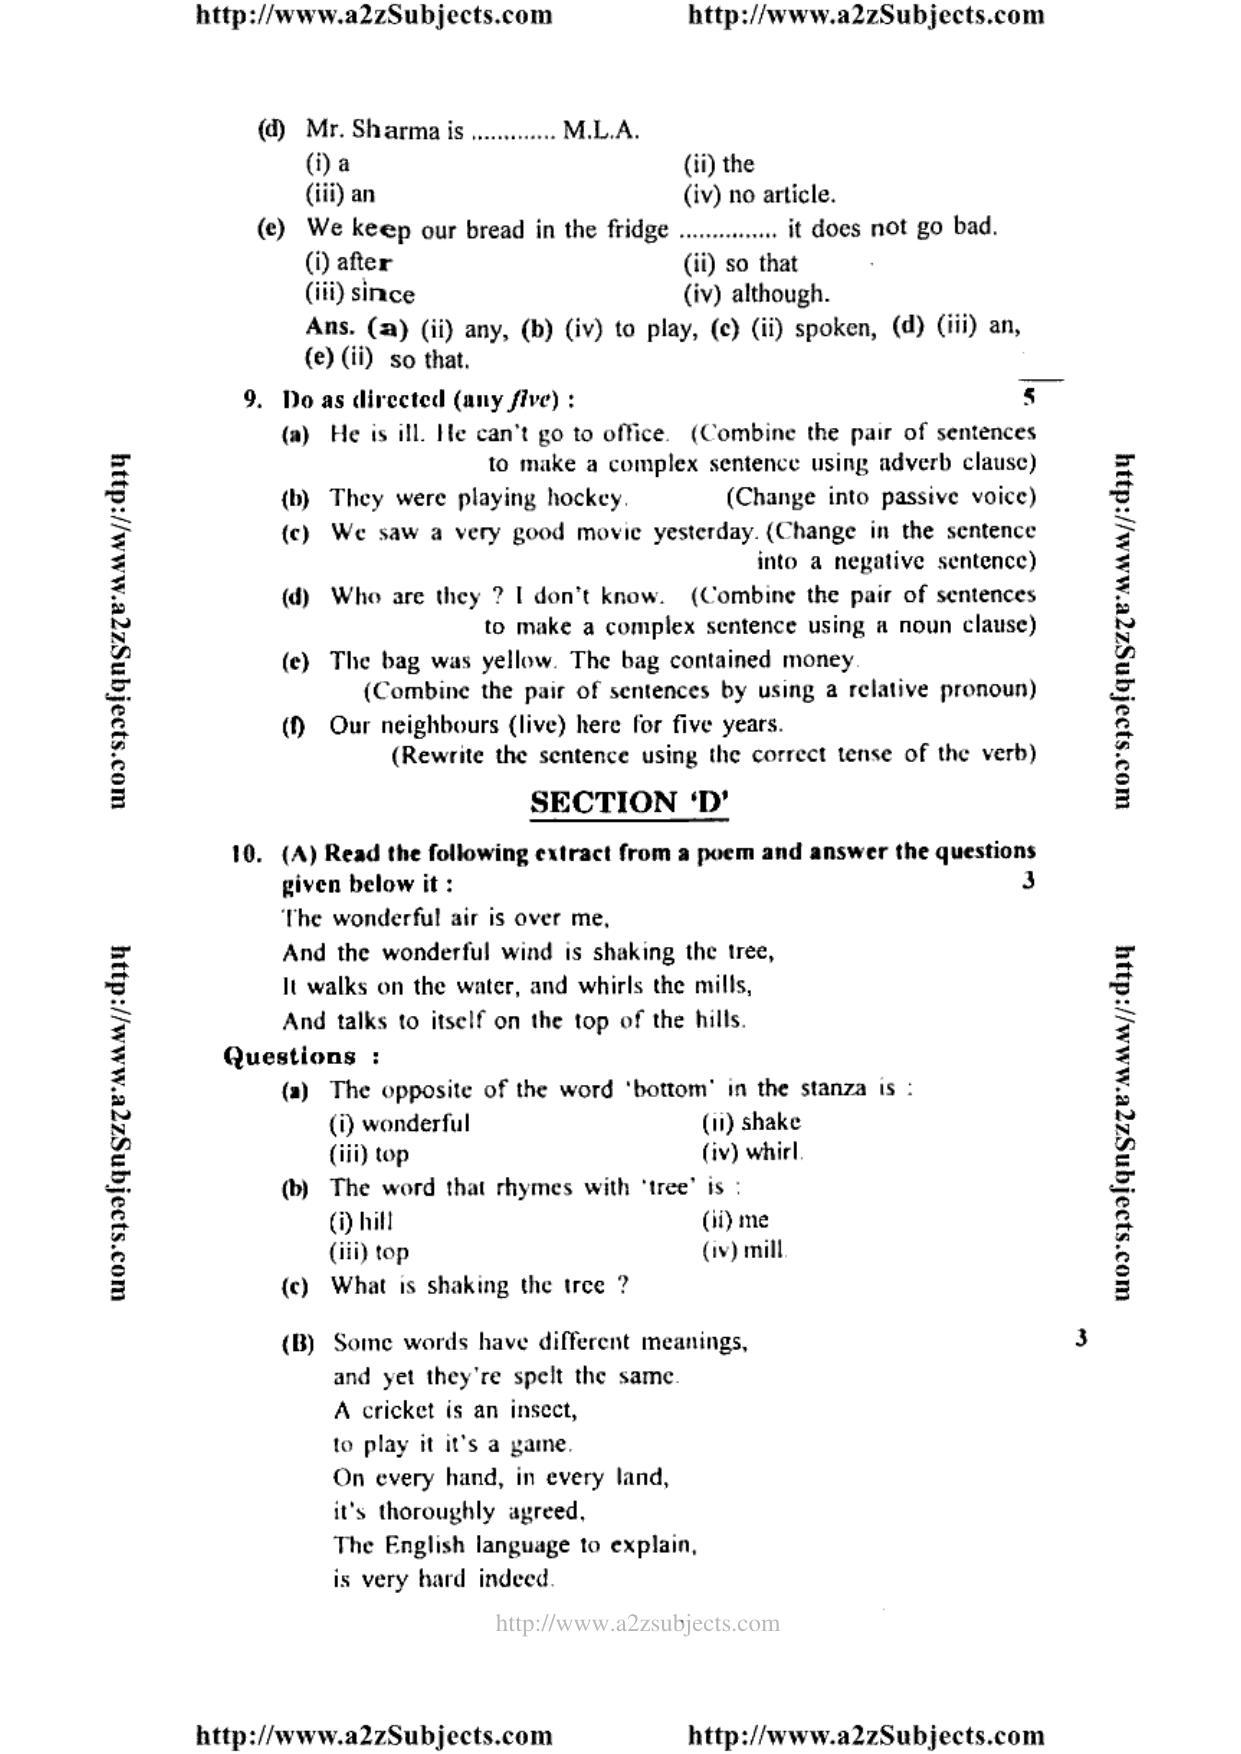 MP Board Class 12 English General 2014 Question Paper - Page 4